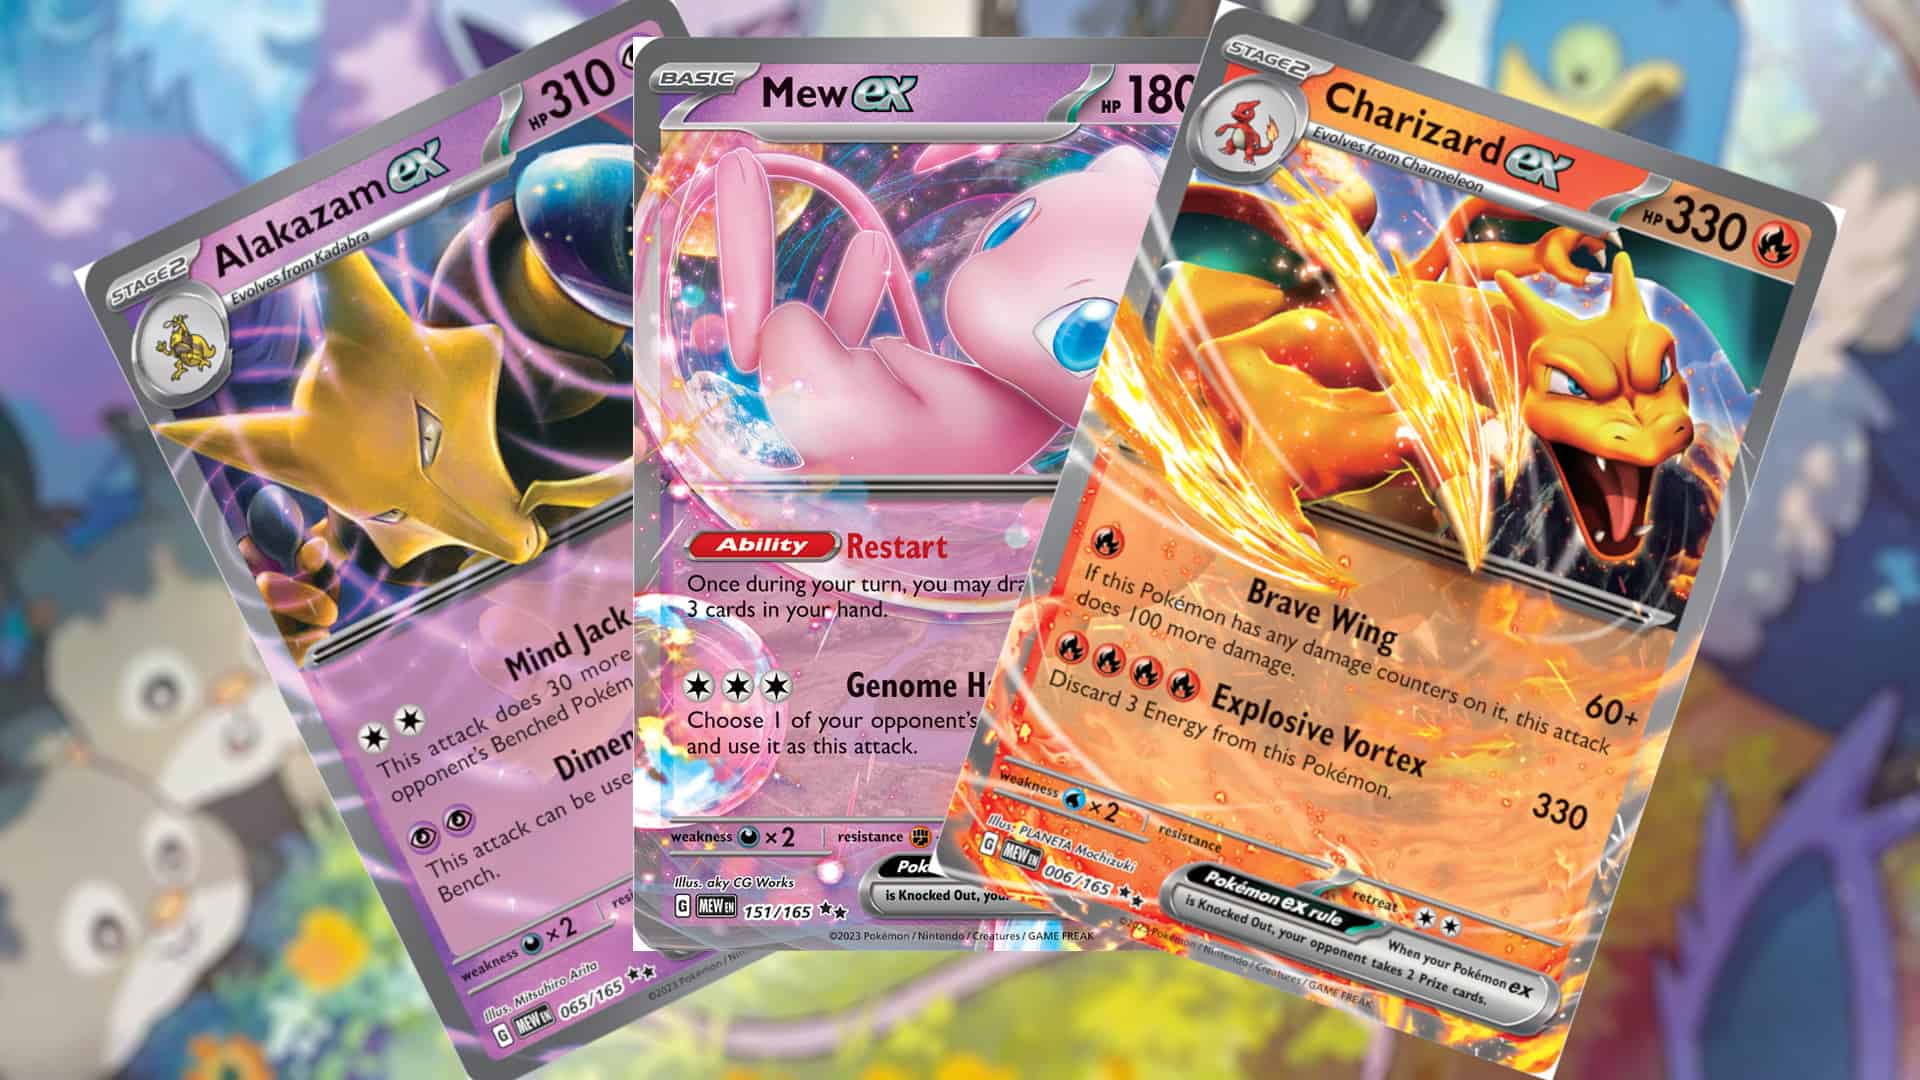 Picture of Alakazam EX, Mew EX, and Charizard EX from Pokemon 151